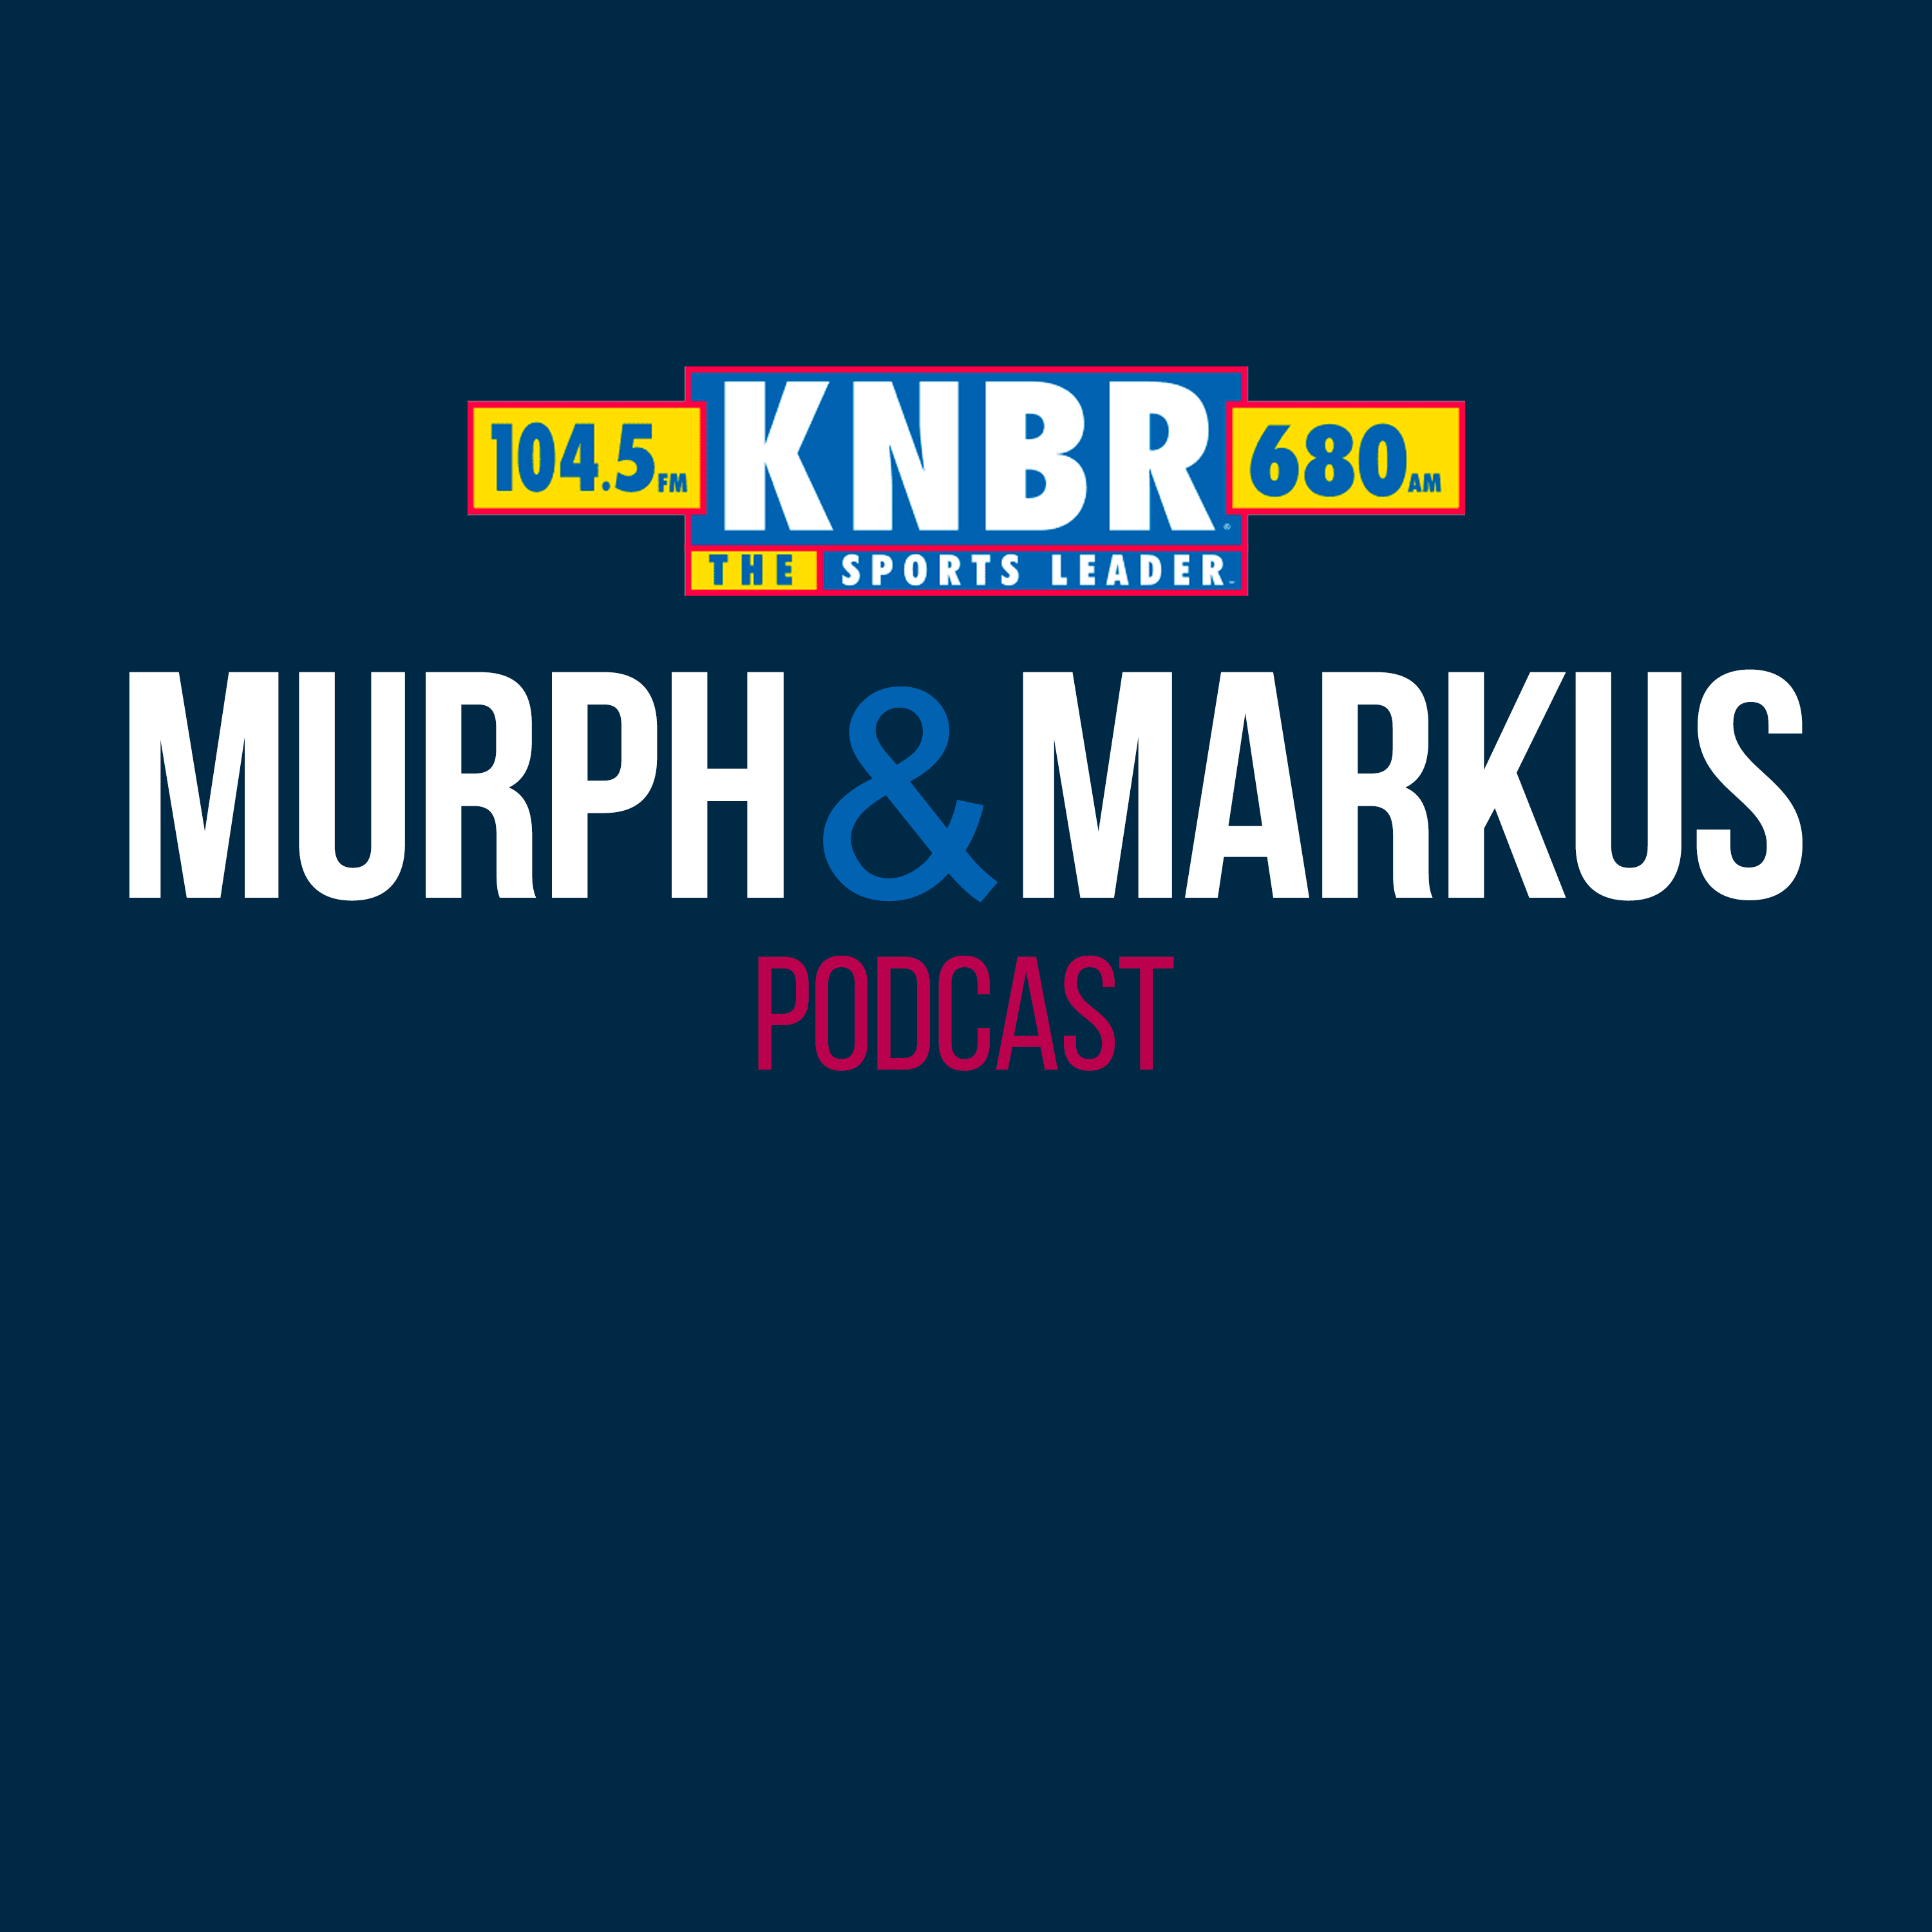 6-13 Hour 3: Murph & Markus dive into the Cooler of Content, discuss the future of Brett Wisely at SS, and talk to Matt Maiocco